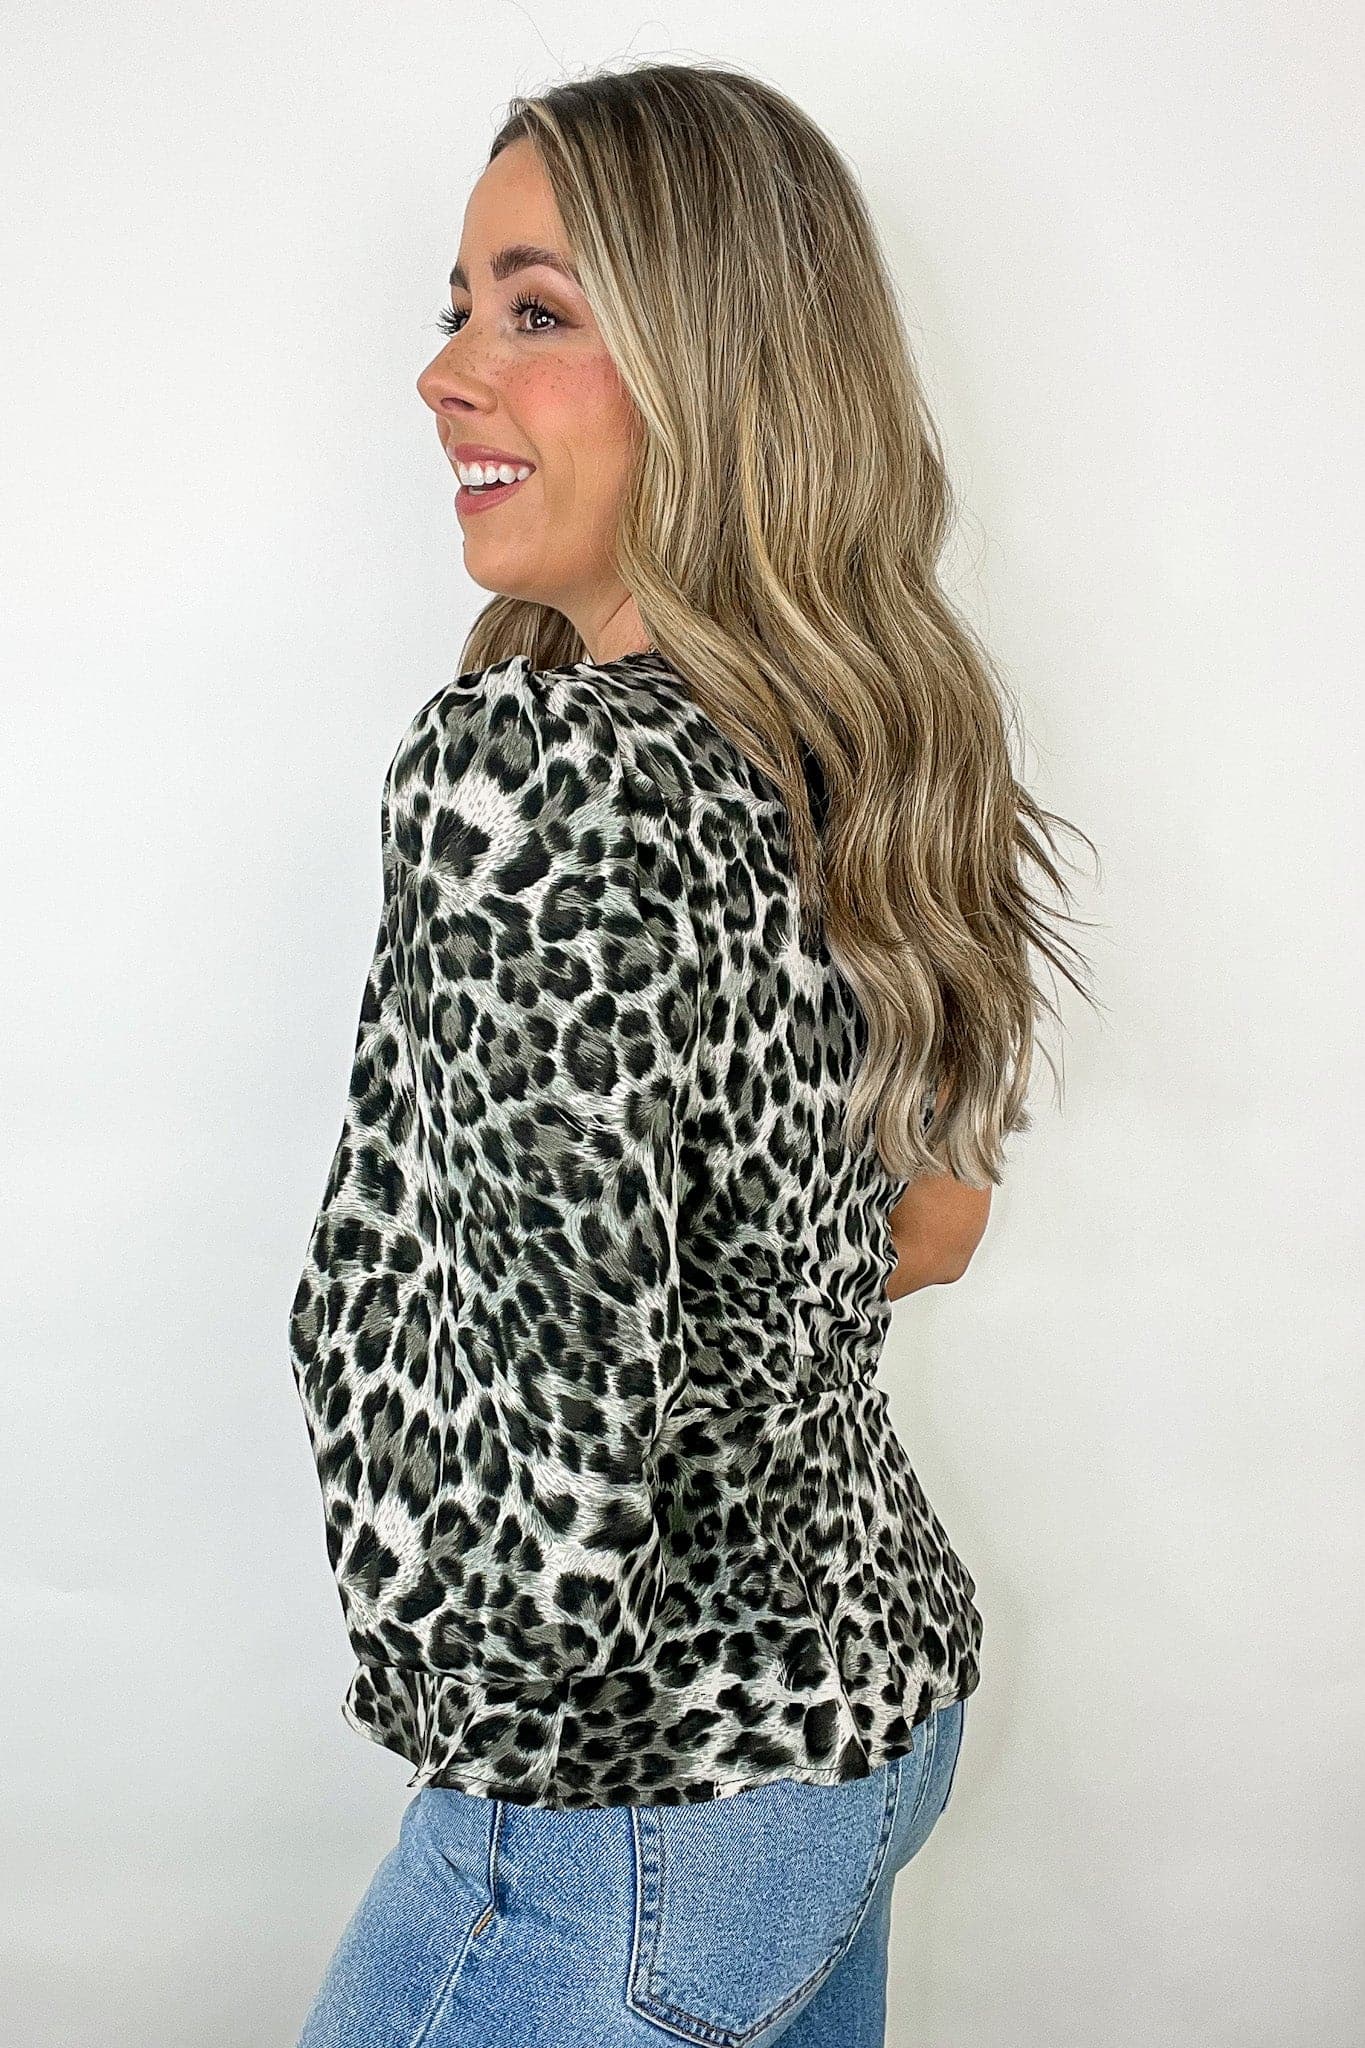  Right Way One Shoulder Animal Print Top - FINAL SALE - Madison and Mallory